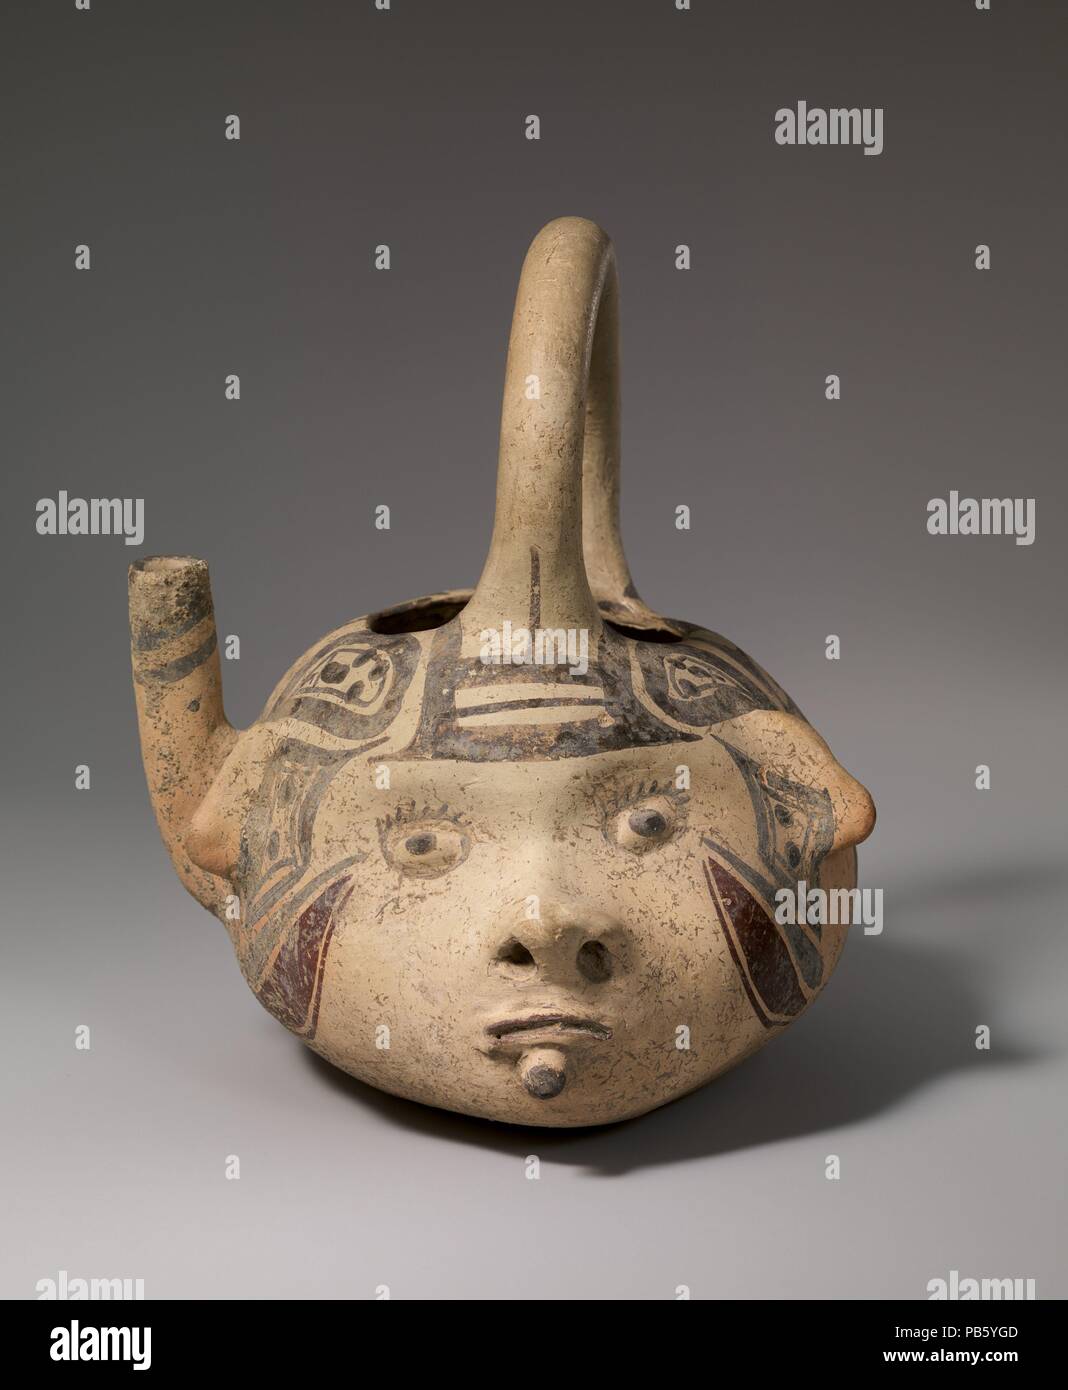 Spouted Vessel. Culture: Huastec. Dimensions: H. 7 1/2 x W. 6 5/16 in. (19.1 x 16 cm). Date: 13th-15th century.  The vessel is in the shape of a human head with wide open, staring eyes, a small pug nose, and closed mouth. A lip plug is worn in the lower lip. A handle extends from the forehead to the back of the head. On the right side behind the ear projects a single spout pointing upward. On the sides of the face and back of the head the cream-colored surface is covered with geometric motifs including dots, circles, diamonds and crosses in dark brown and purple. Museum: Metropolitan Museum of Stock Photo